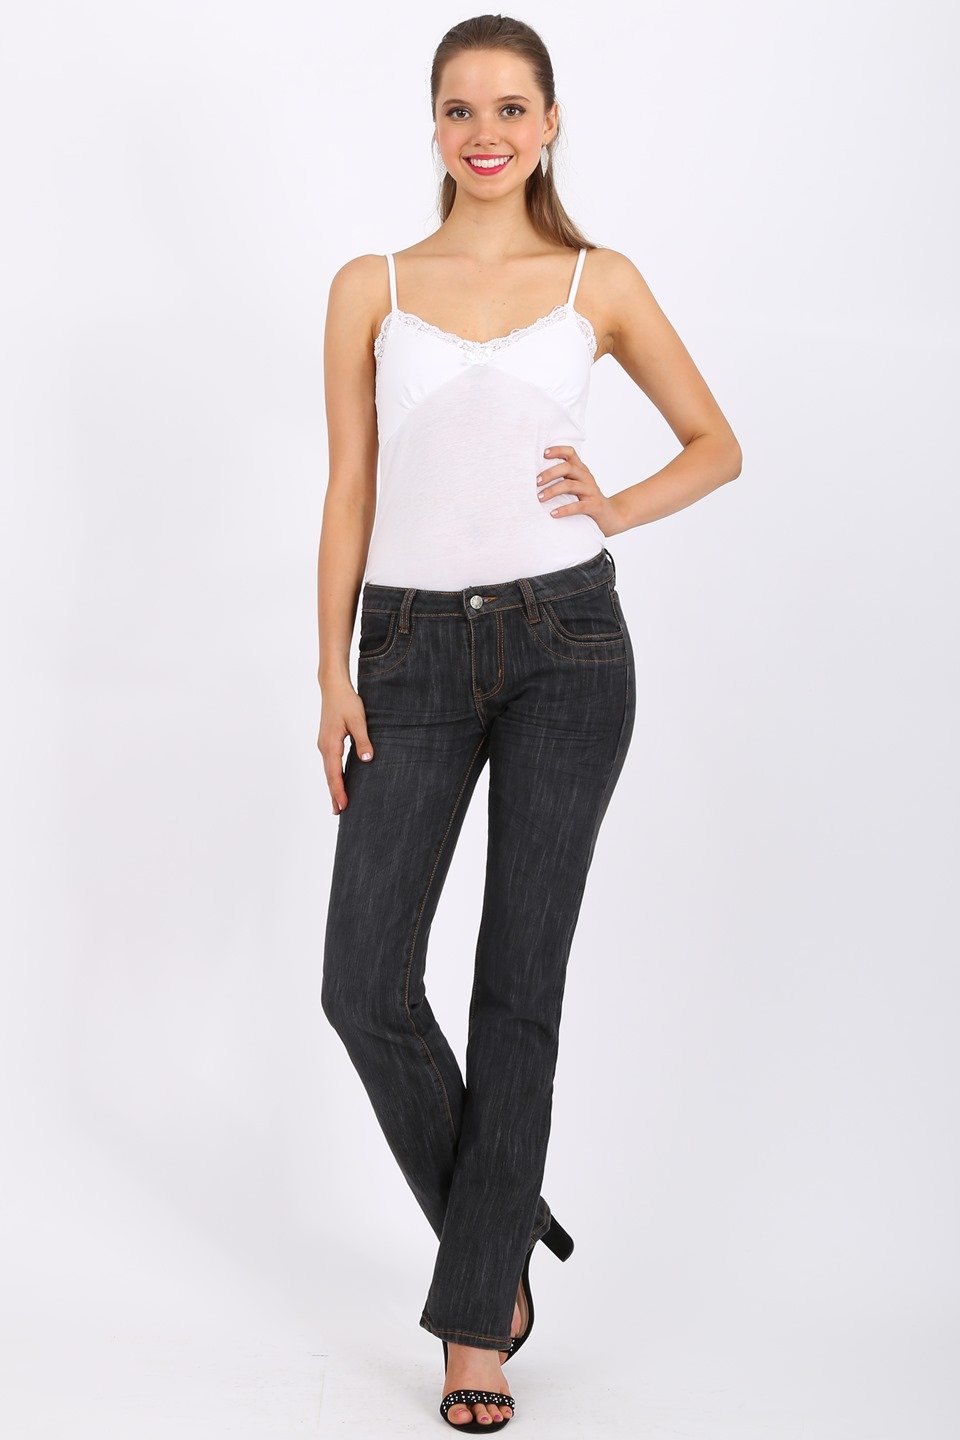 MISS PINKI Maia bootlegs Jeans in black wash